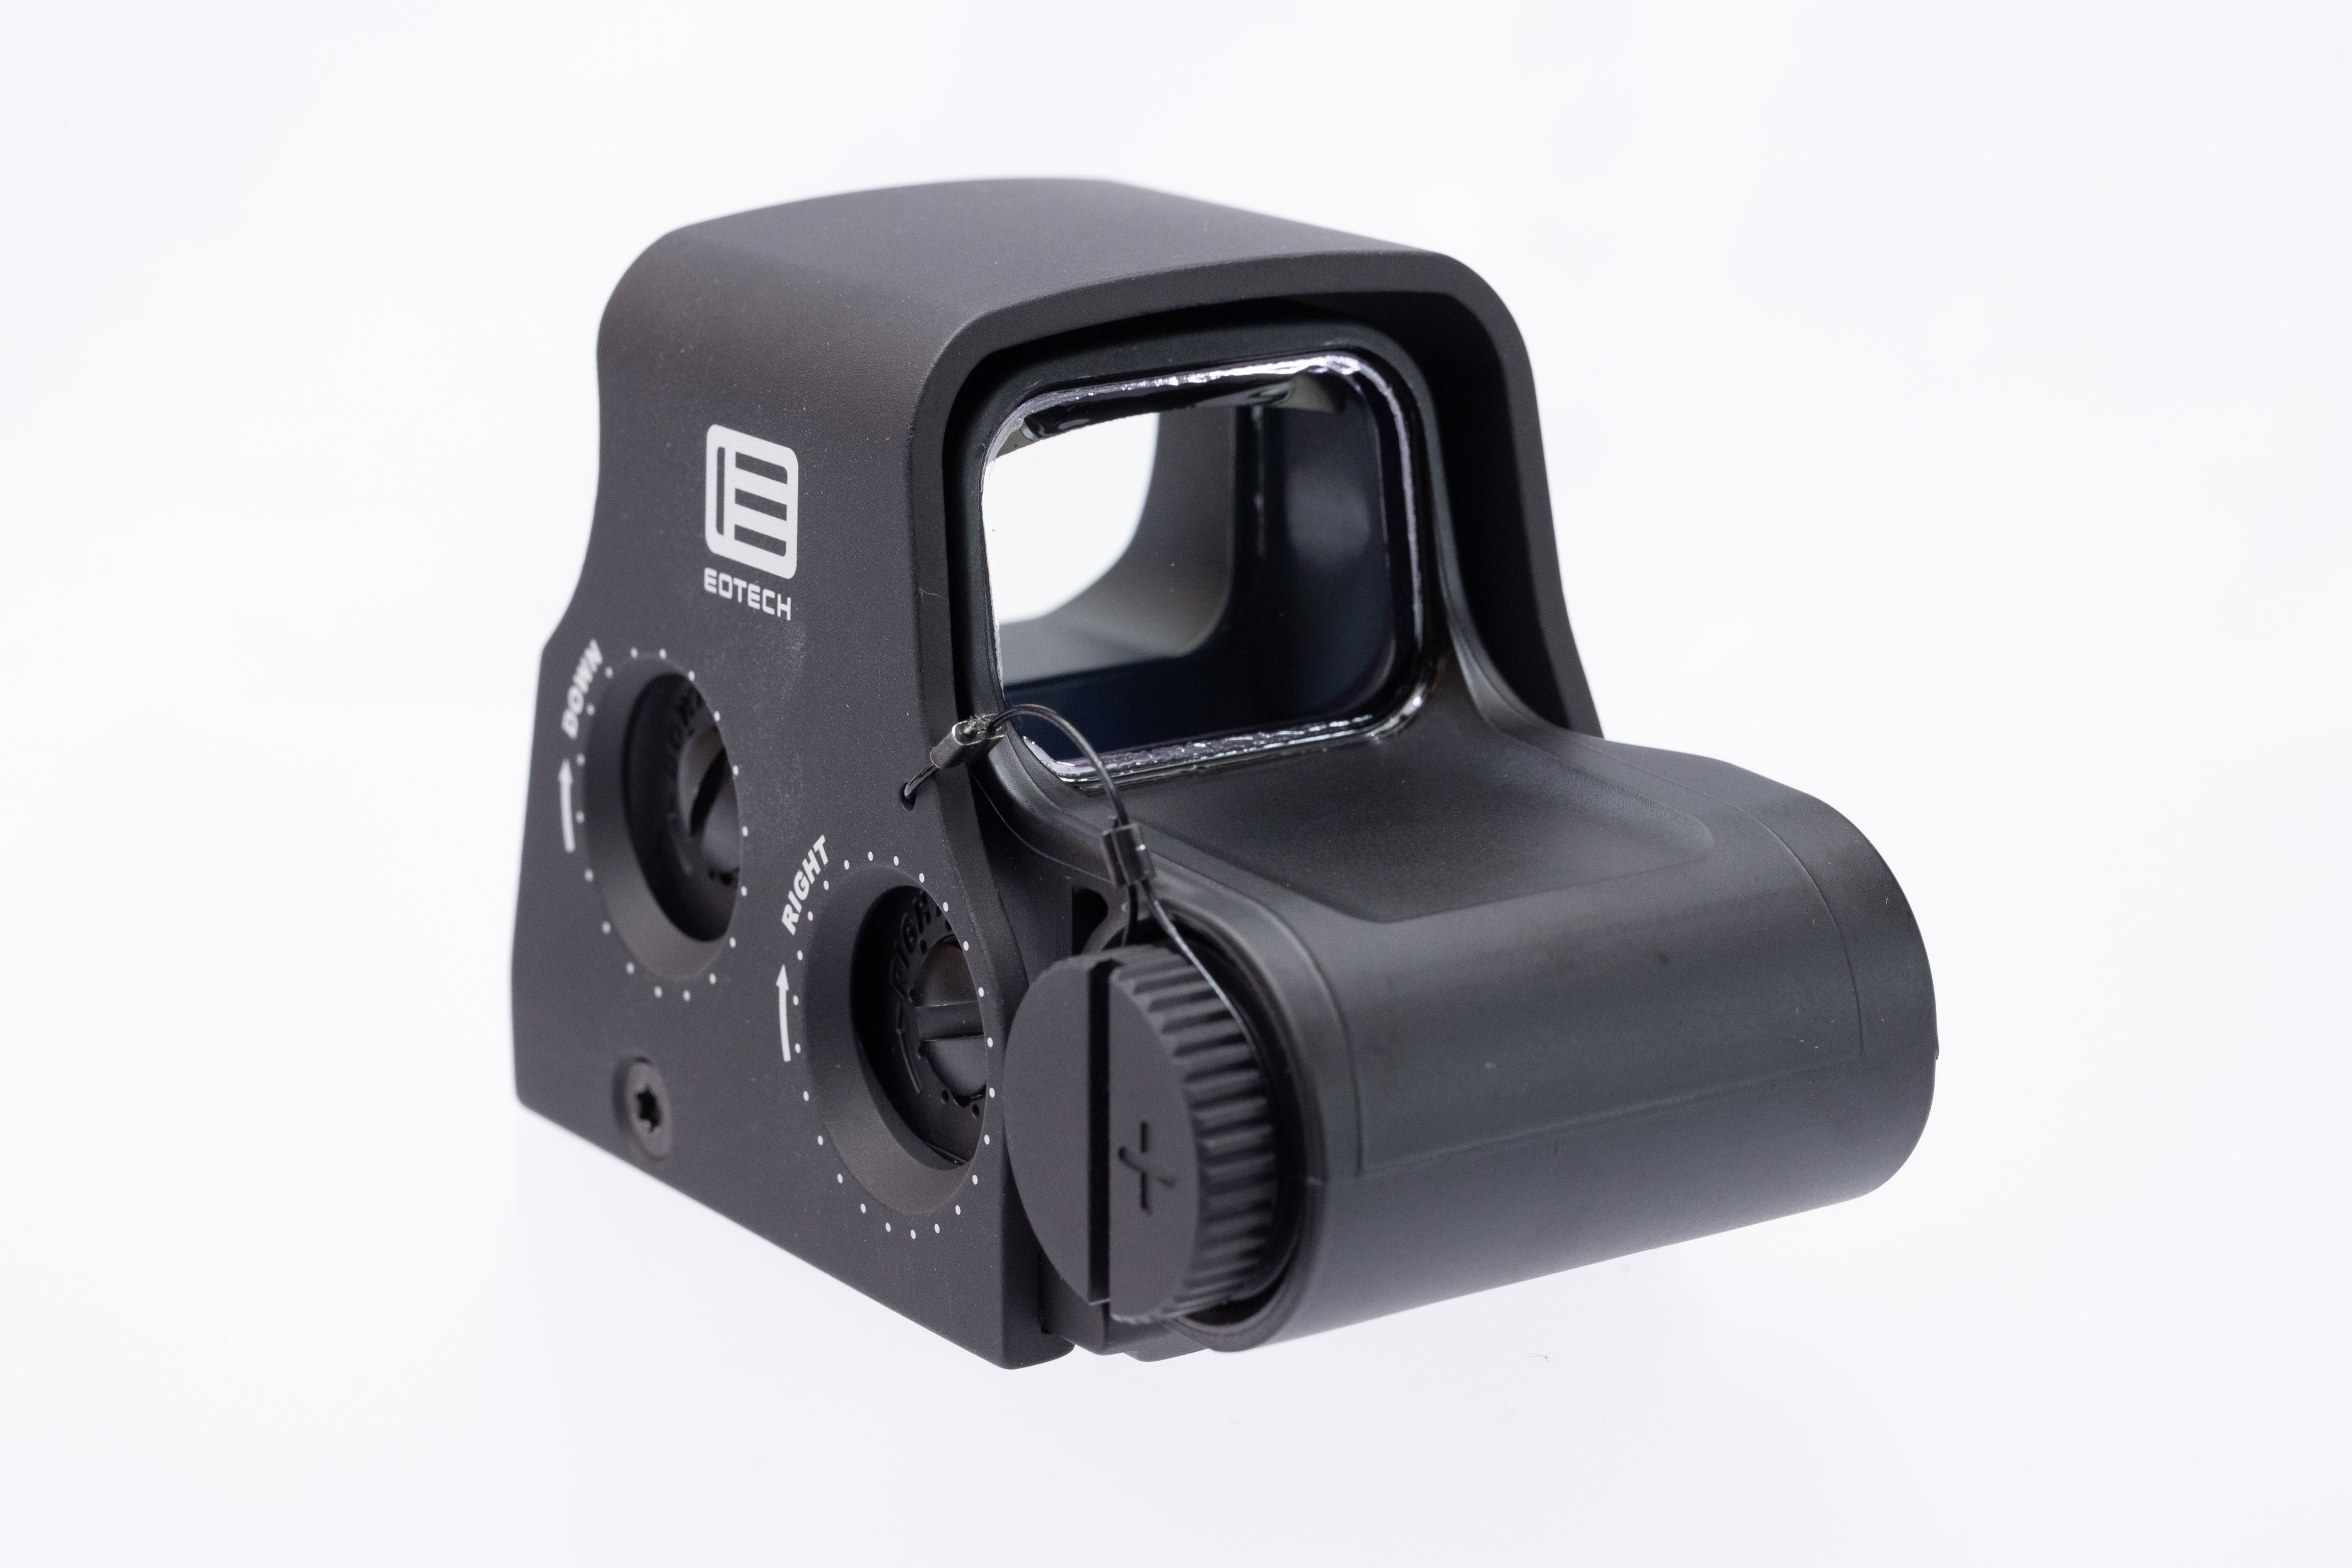 AIRSOFT97 沖縄本店 通販部 / 【実物】EoTech XPS2-0 ホロサイト